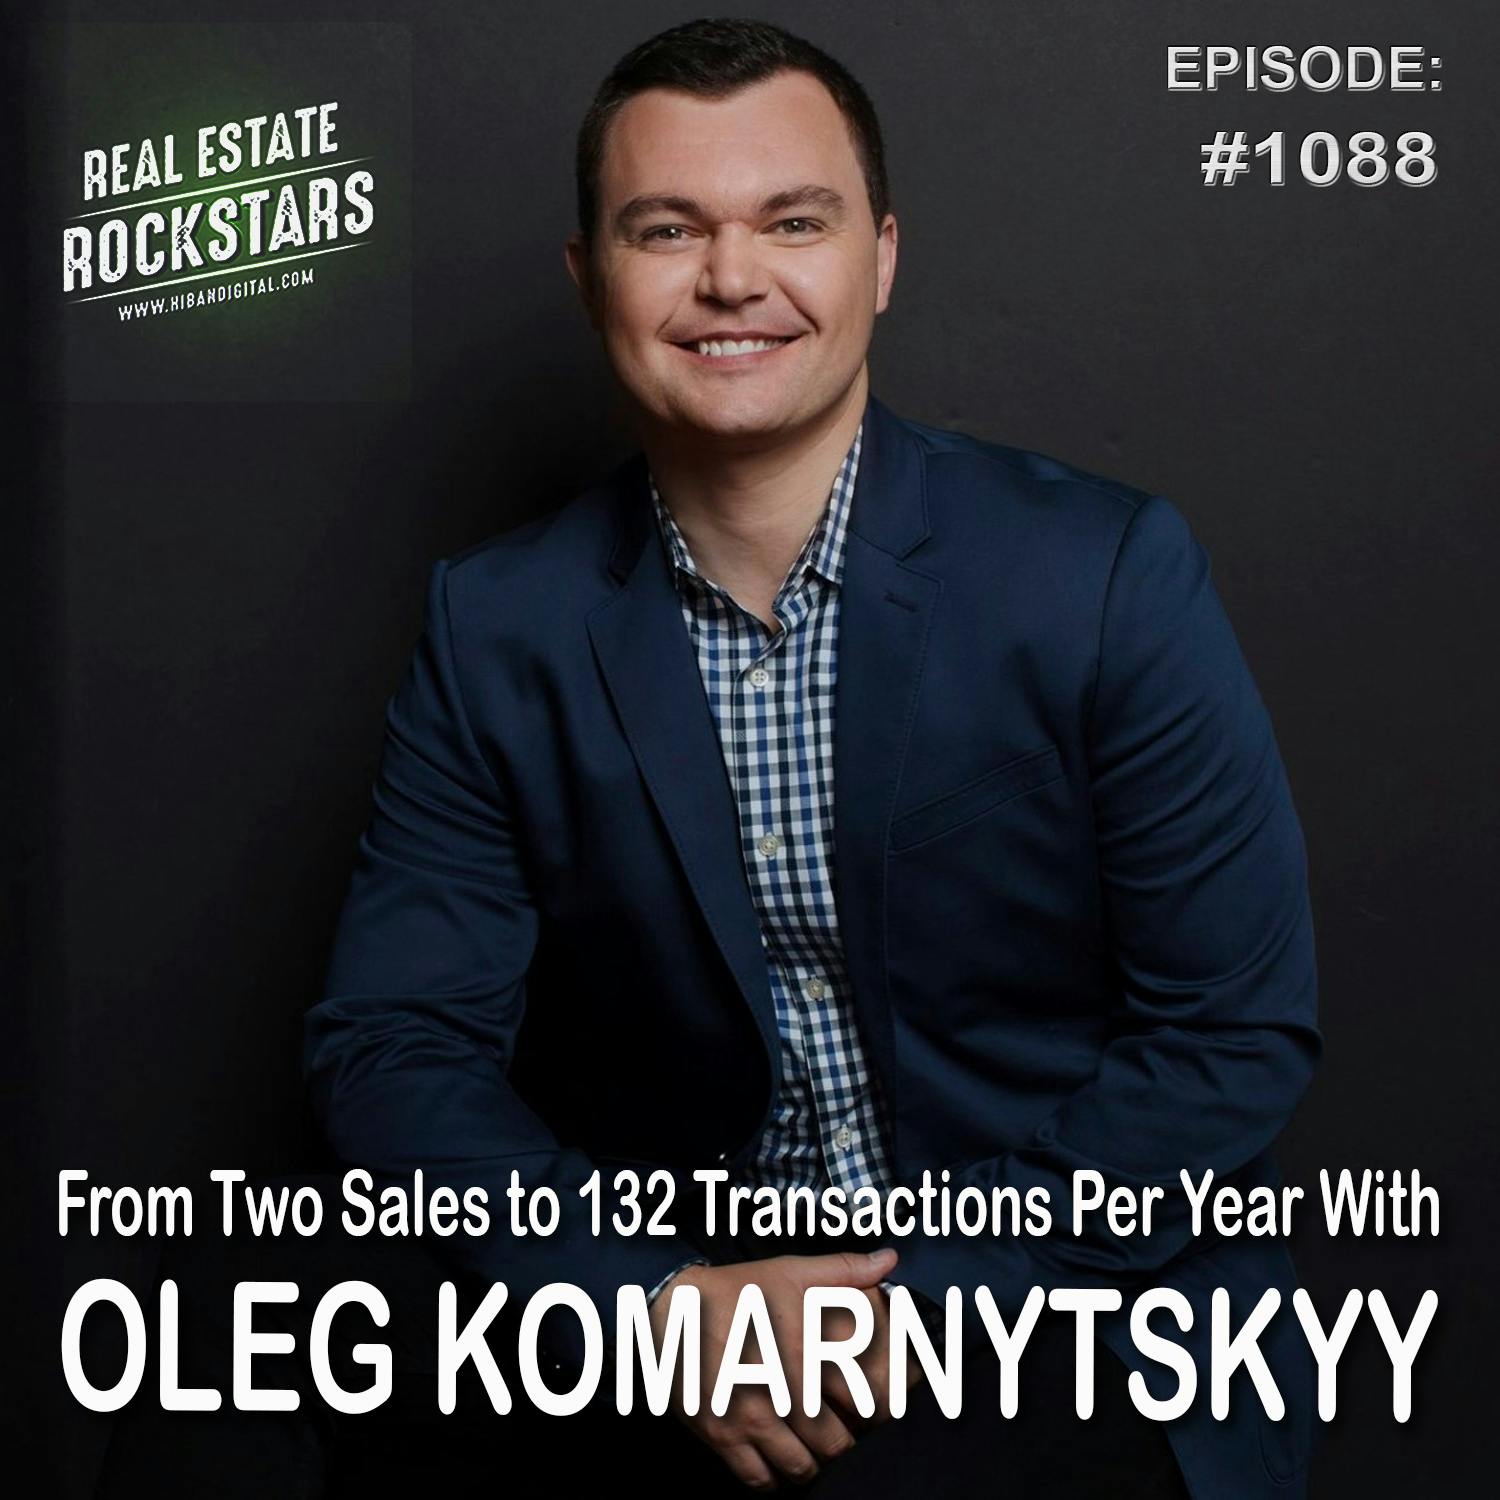 1088: From Two Sales to 132 Transactions Per Year With Oleg Komarnytskyy